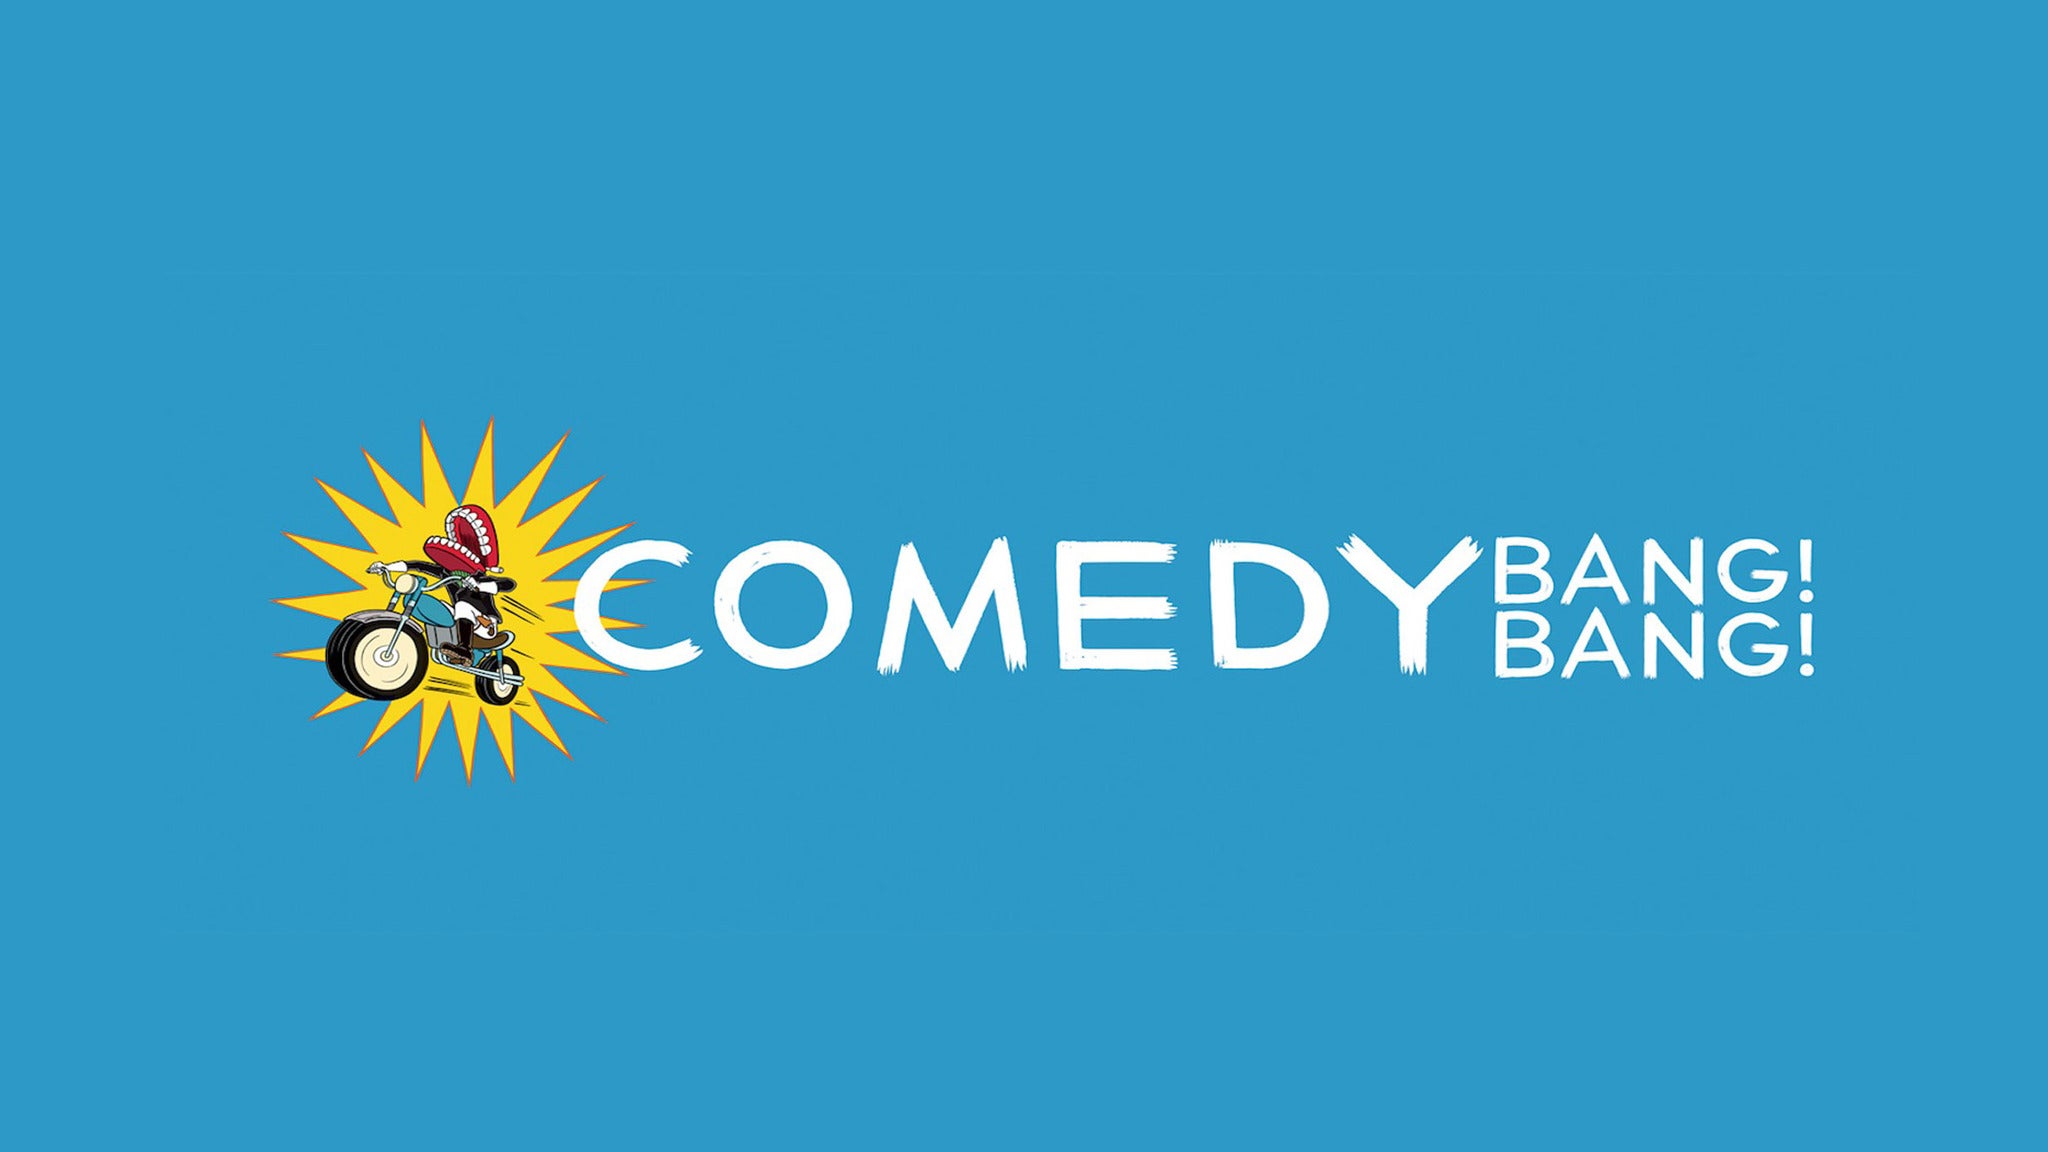 Comedy Bang! Bang! Live! Starring Scott Aukerman with guests in Chicago promo photo for Live Nation Mobile App presale offer code